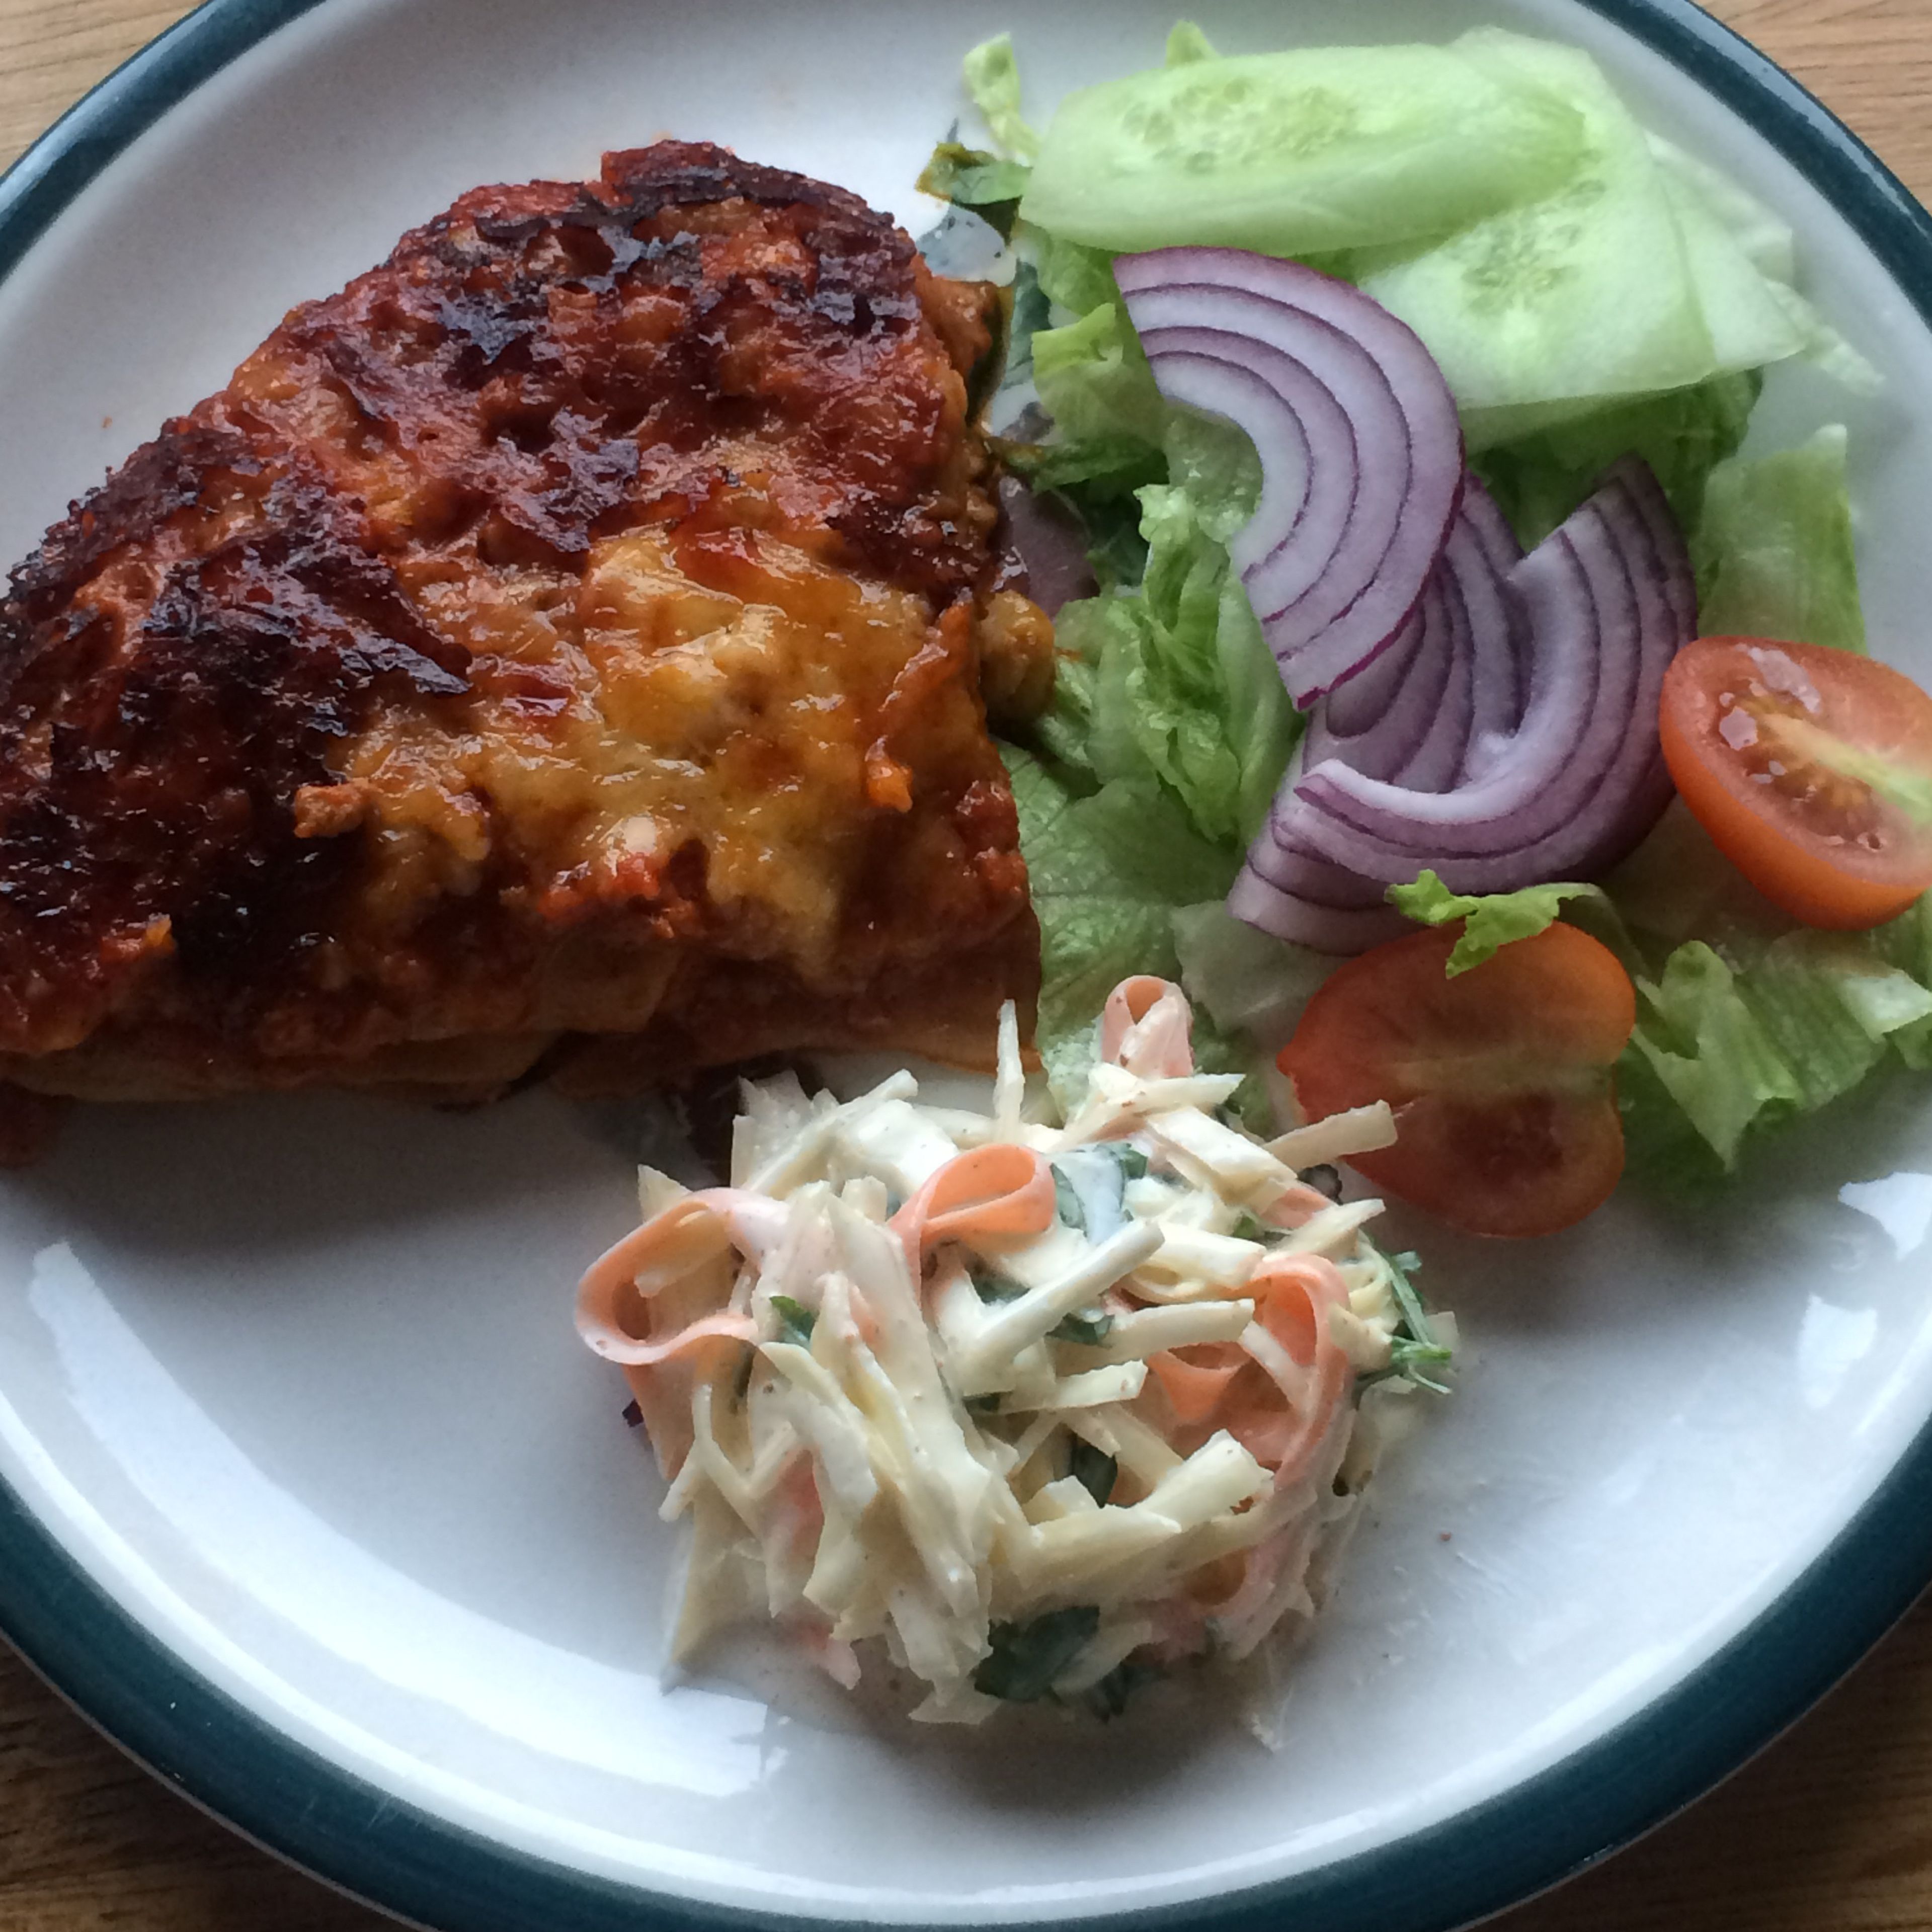 Serve lasagne with side salad and homemade coleslaw. Scrunch the cabbage and ribbons of carrot together to break them down with the salt and sugar. Set this aside for a minute before dressing with the mayonnaise, lemon juice and ground flaxseeds